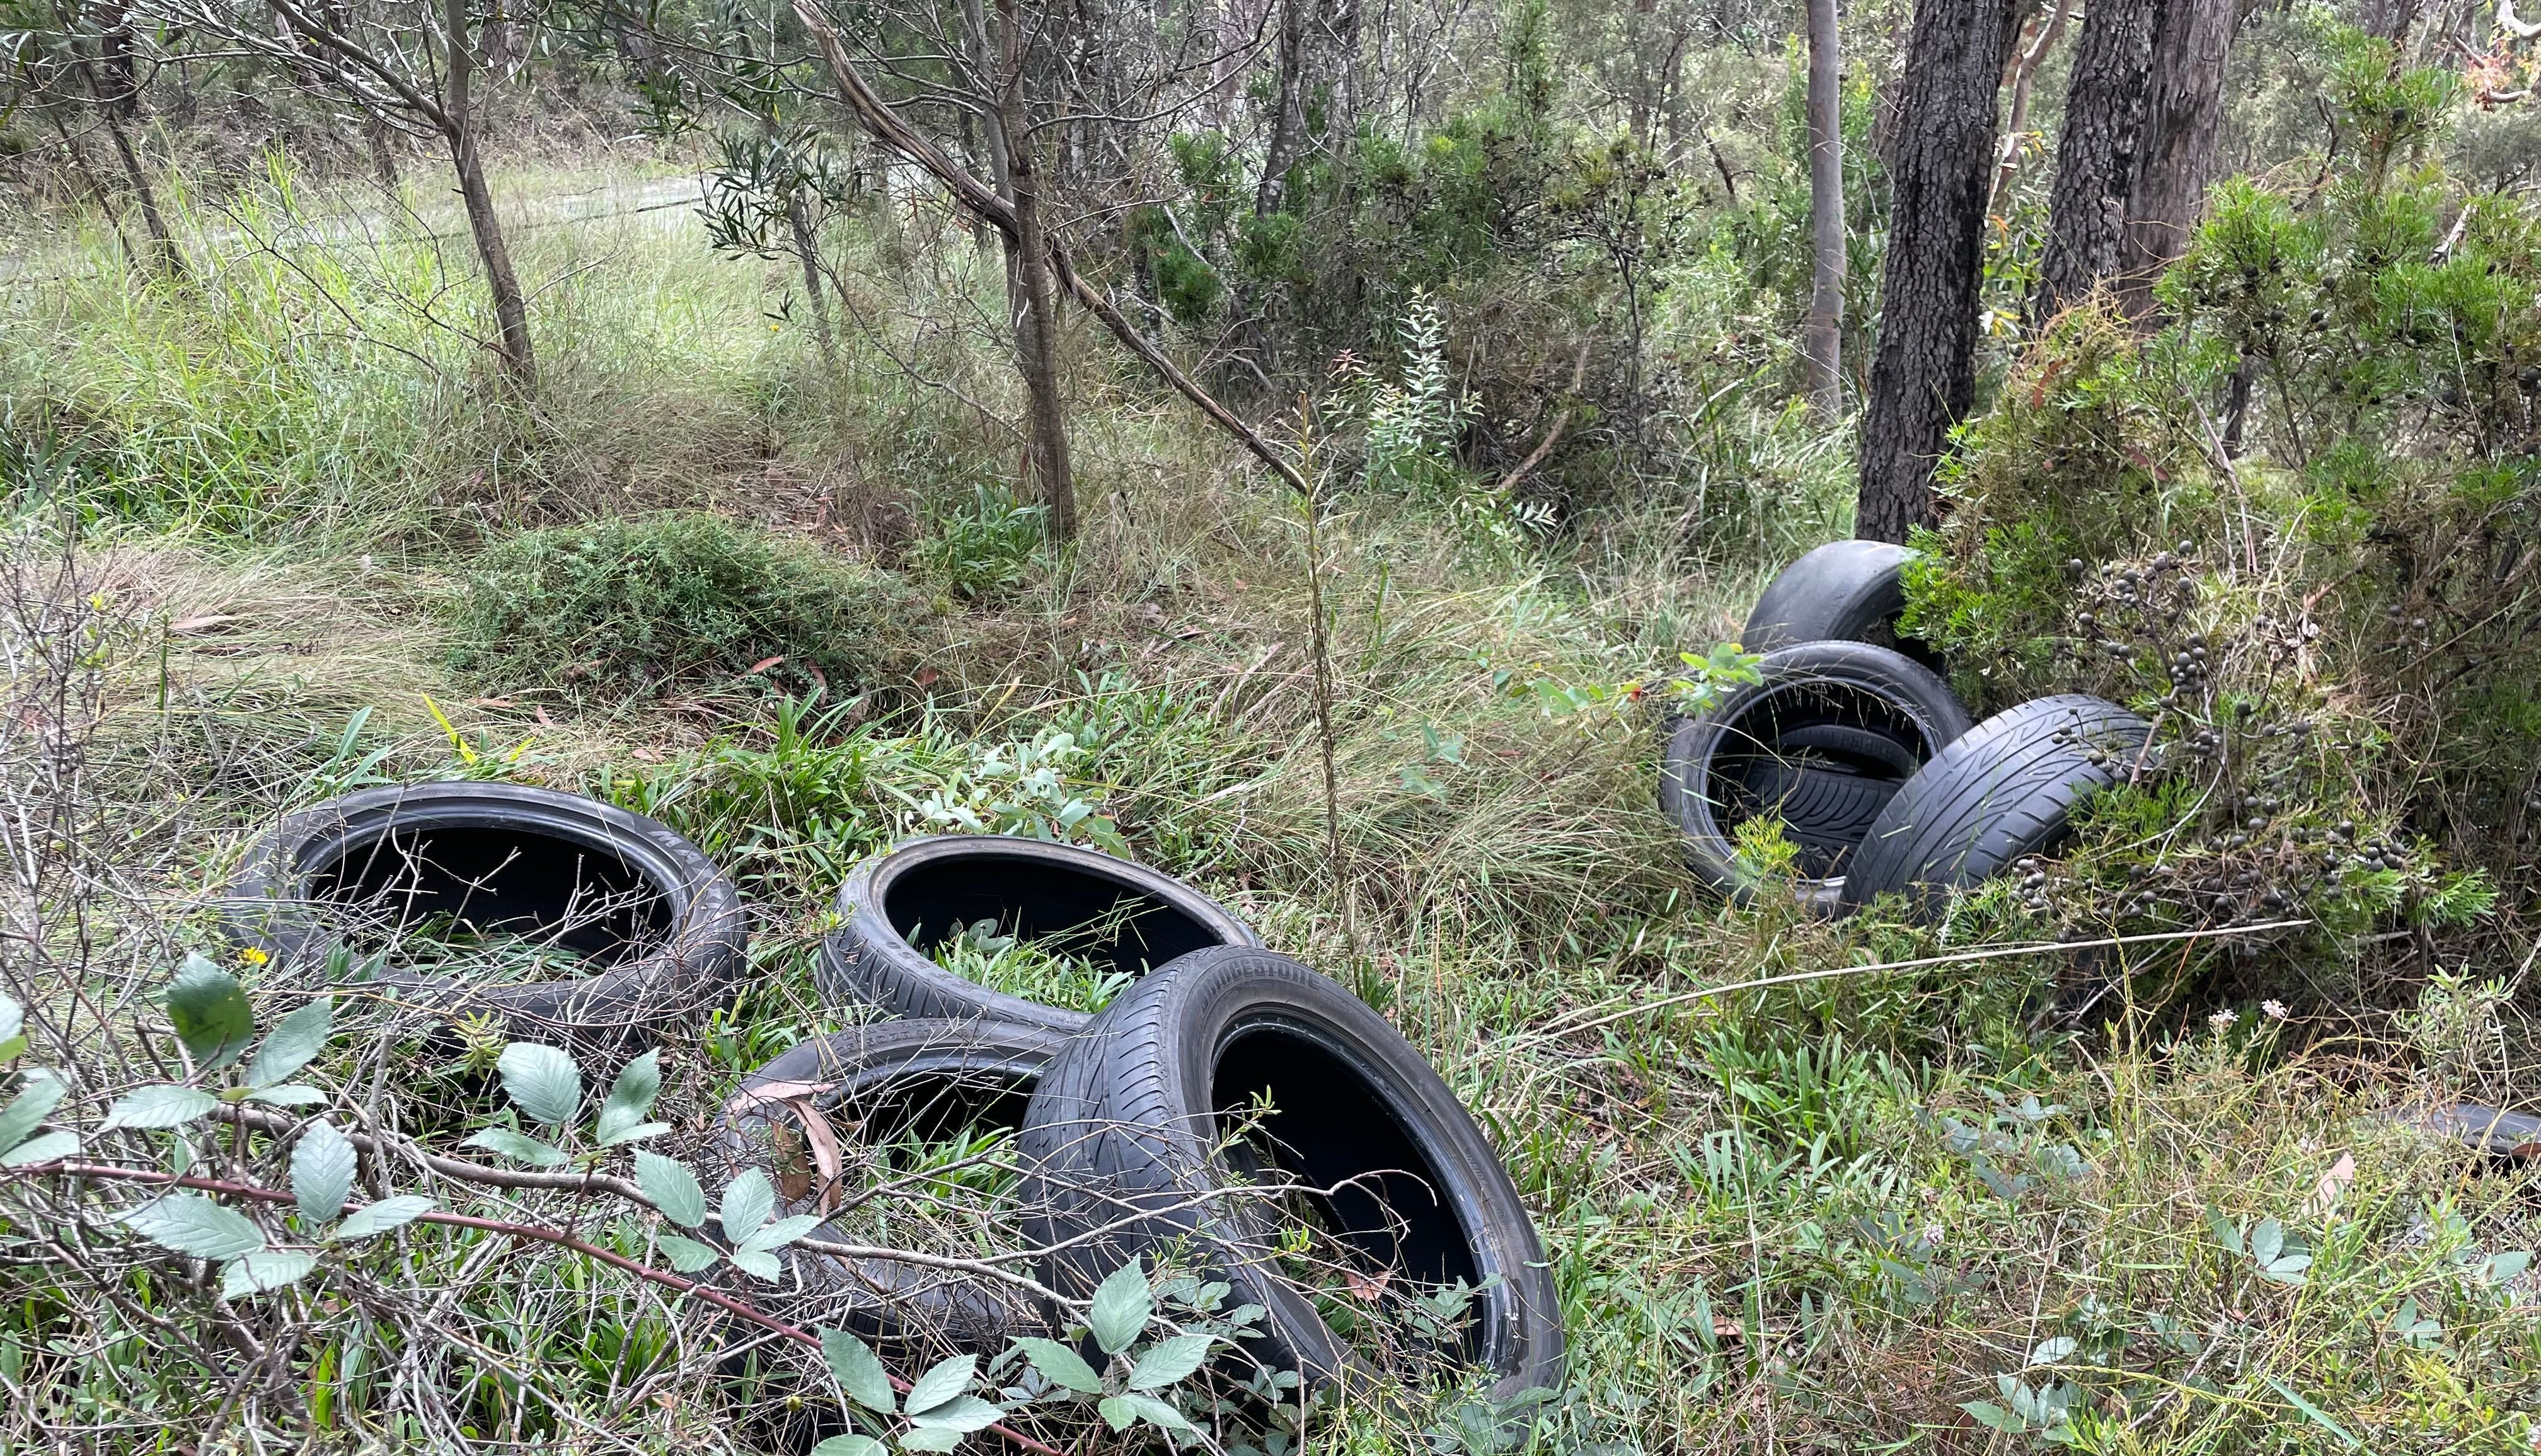 Pictured are some abandoned tyres